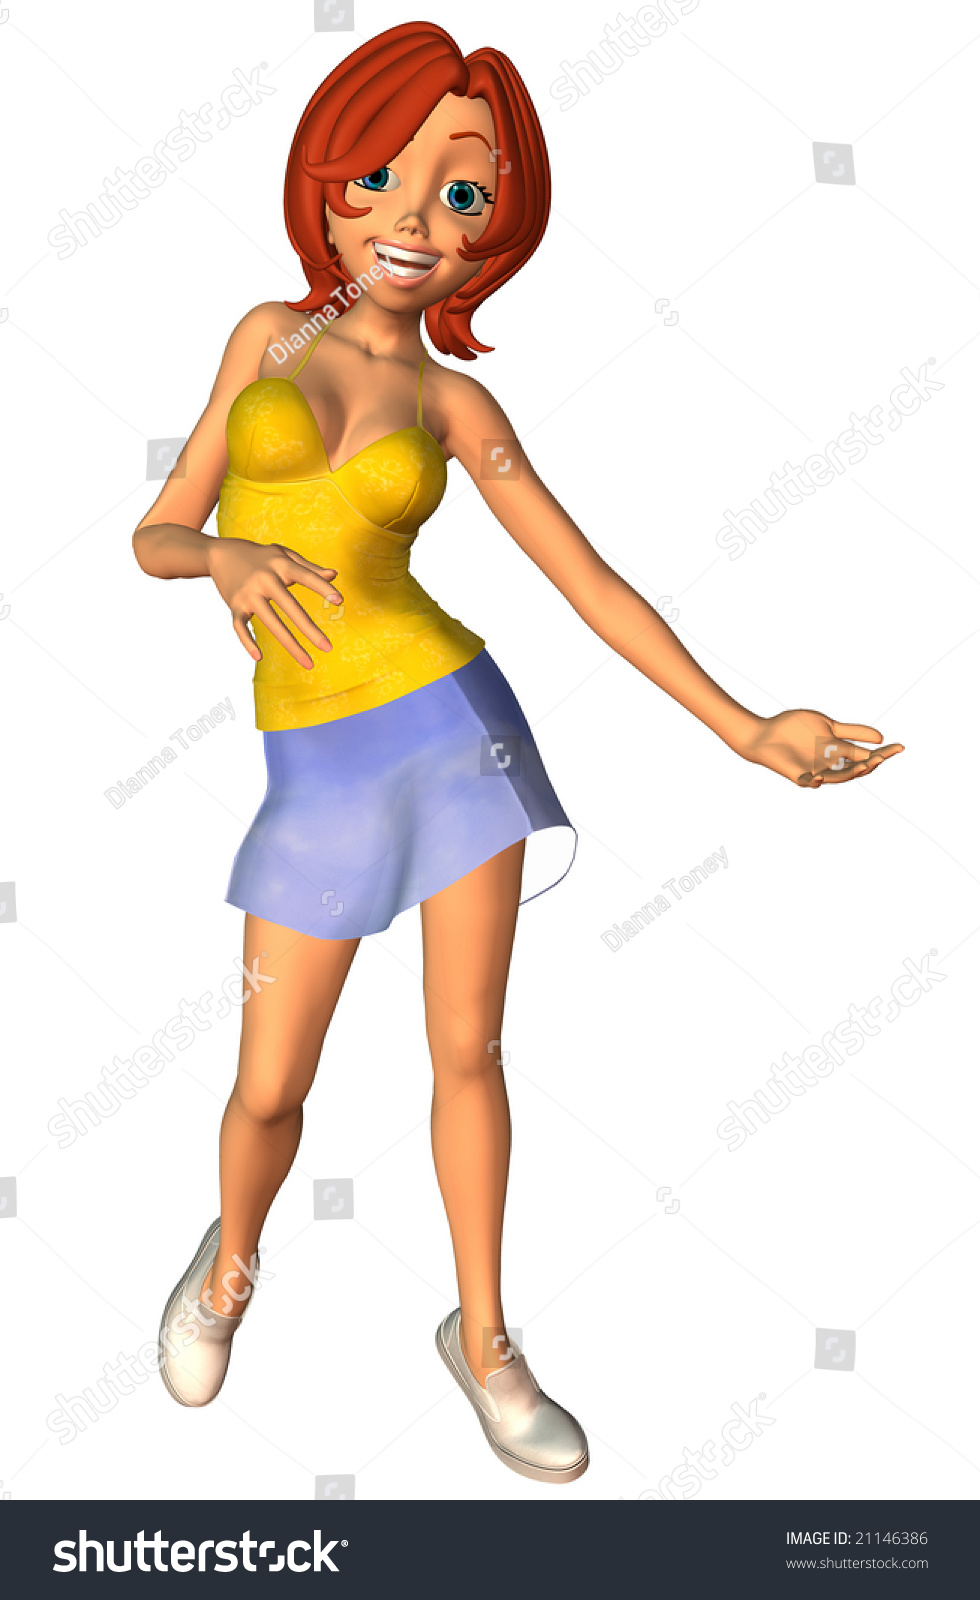 Cartoon Girl Holding Hand Out Call Stock Illustration 21146386